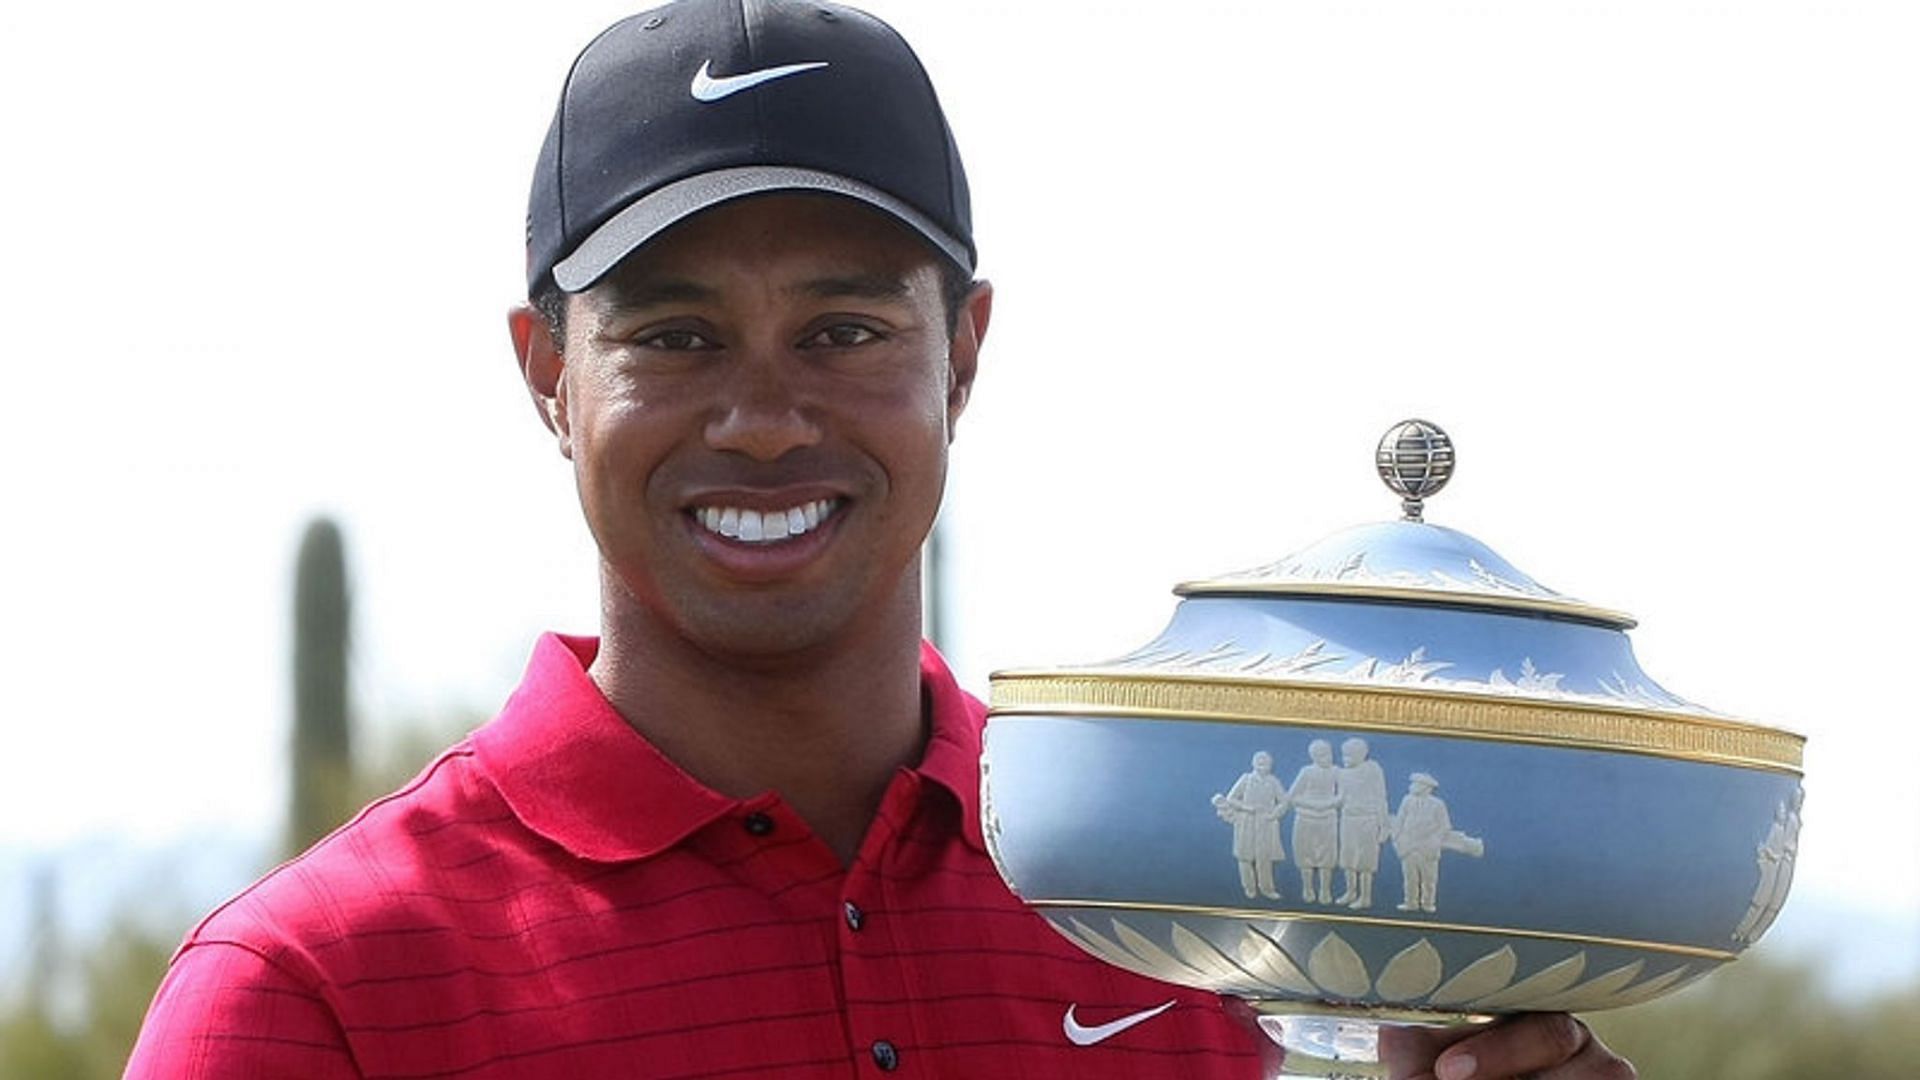 Tiger Woods posing with WGC Match Play 2008 trophy